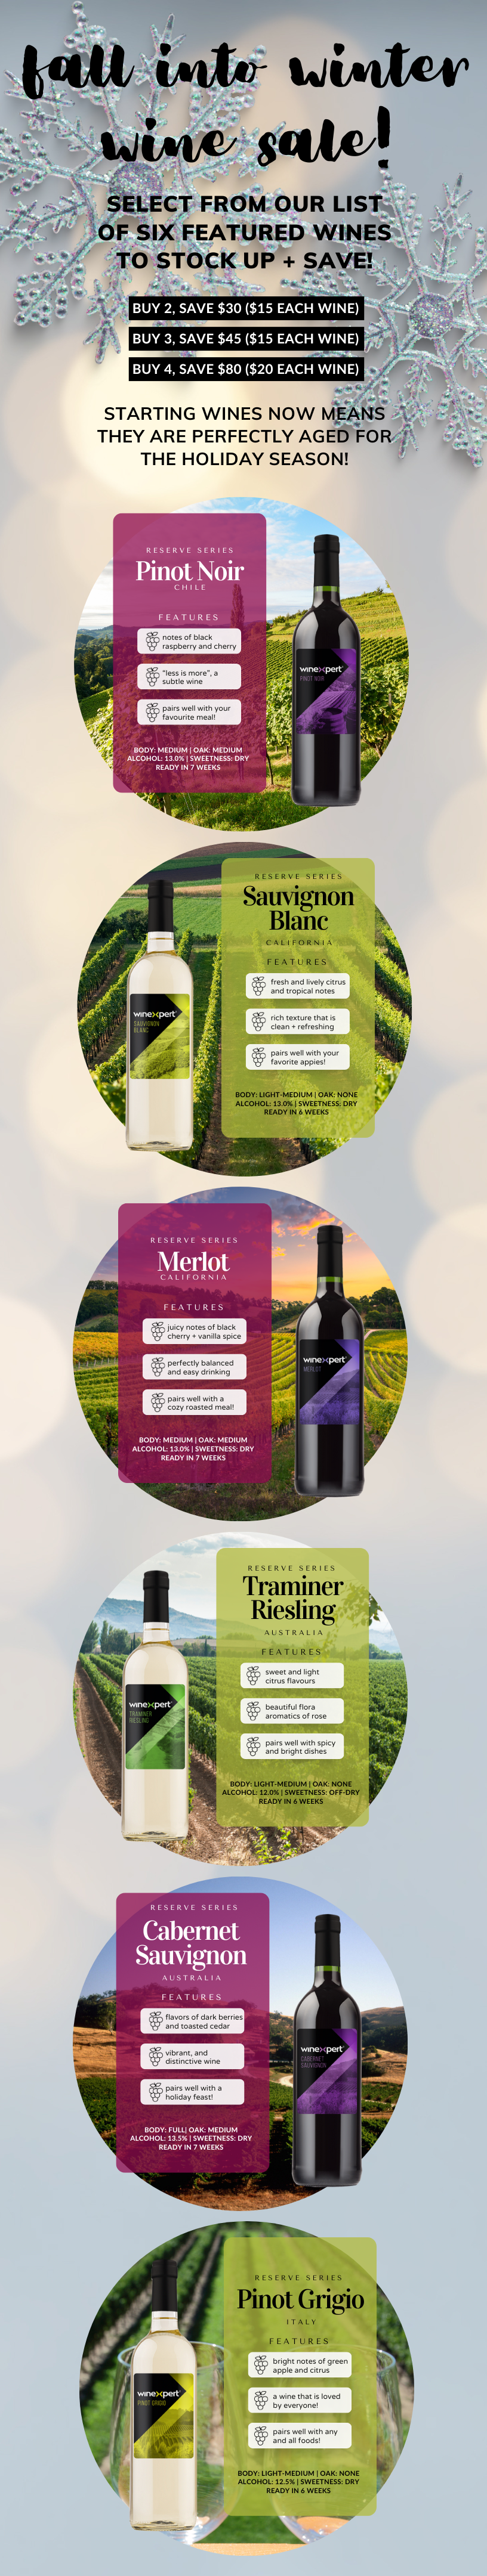 Wine Sale Graphic for Website (2)